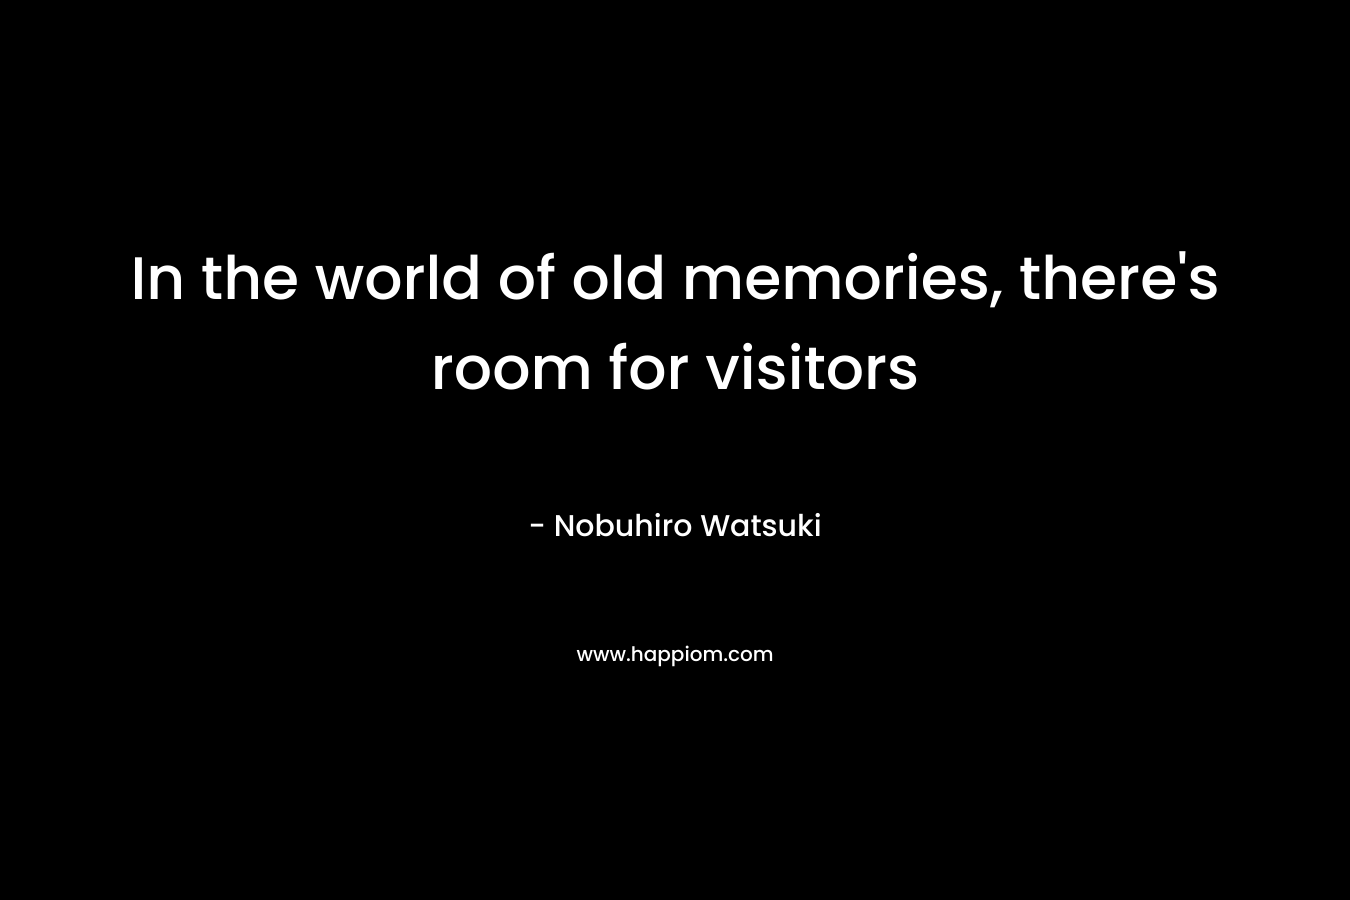 In the world of old memories, there’s room for visitors – Nobuhiro Watsuki